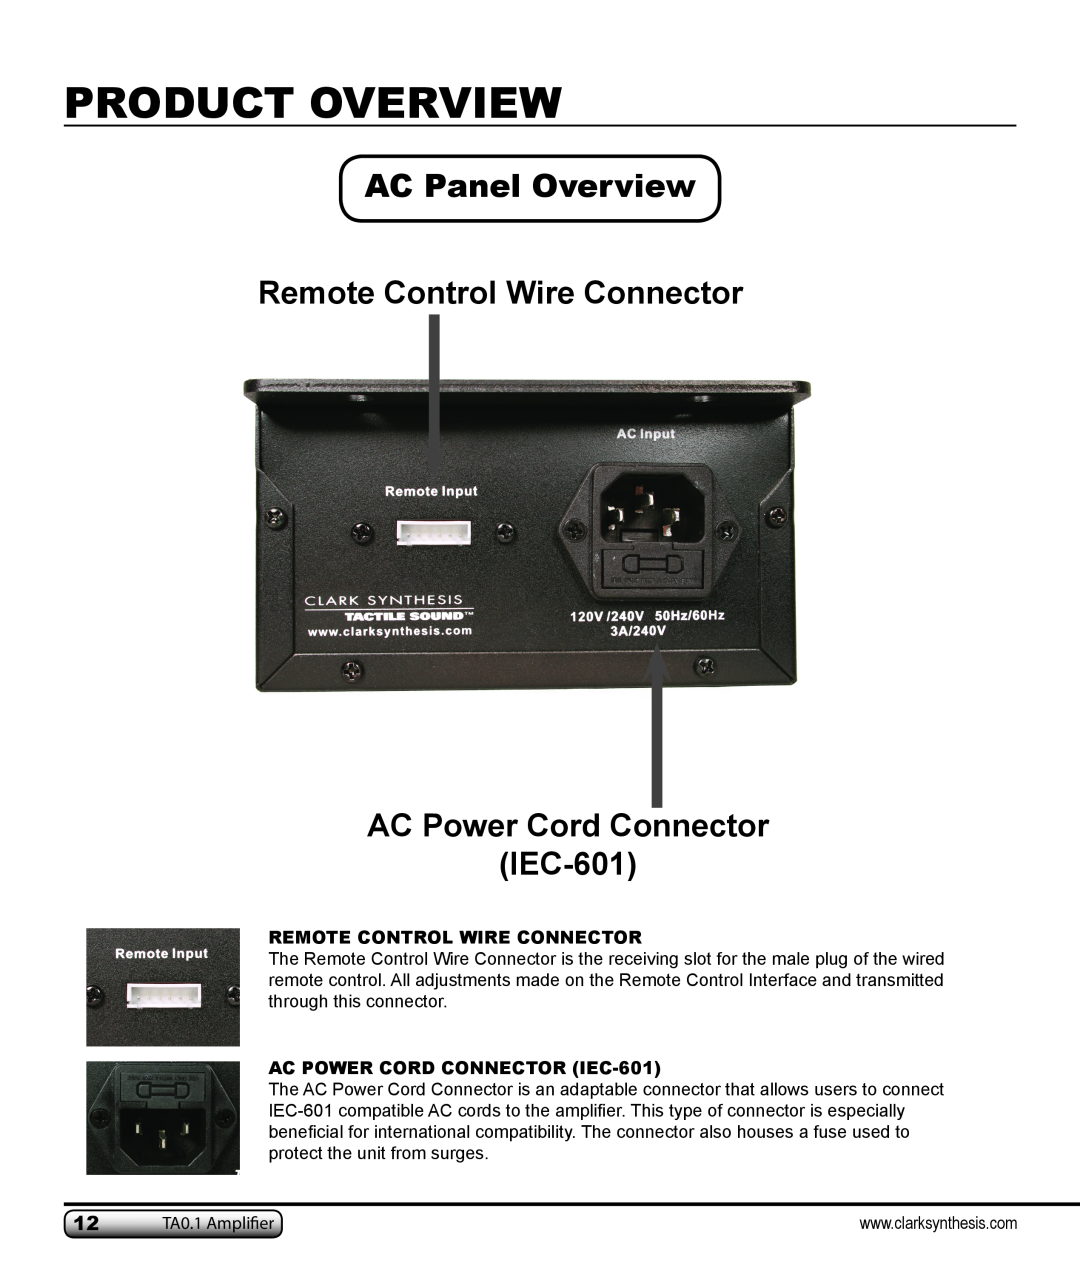 Clark Synthesis TA0.1 AC Panel Overview Remote Control Wire Connector, AC Power Cord Connector IEC-601, Product Overview 